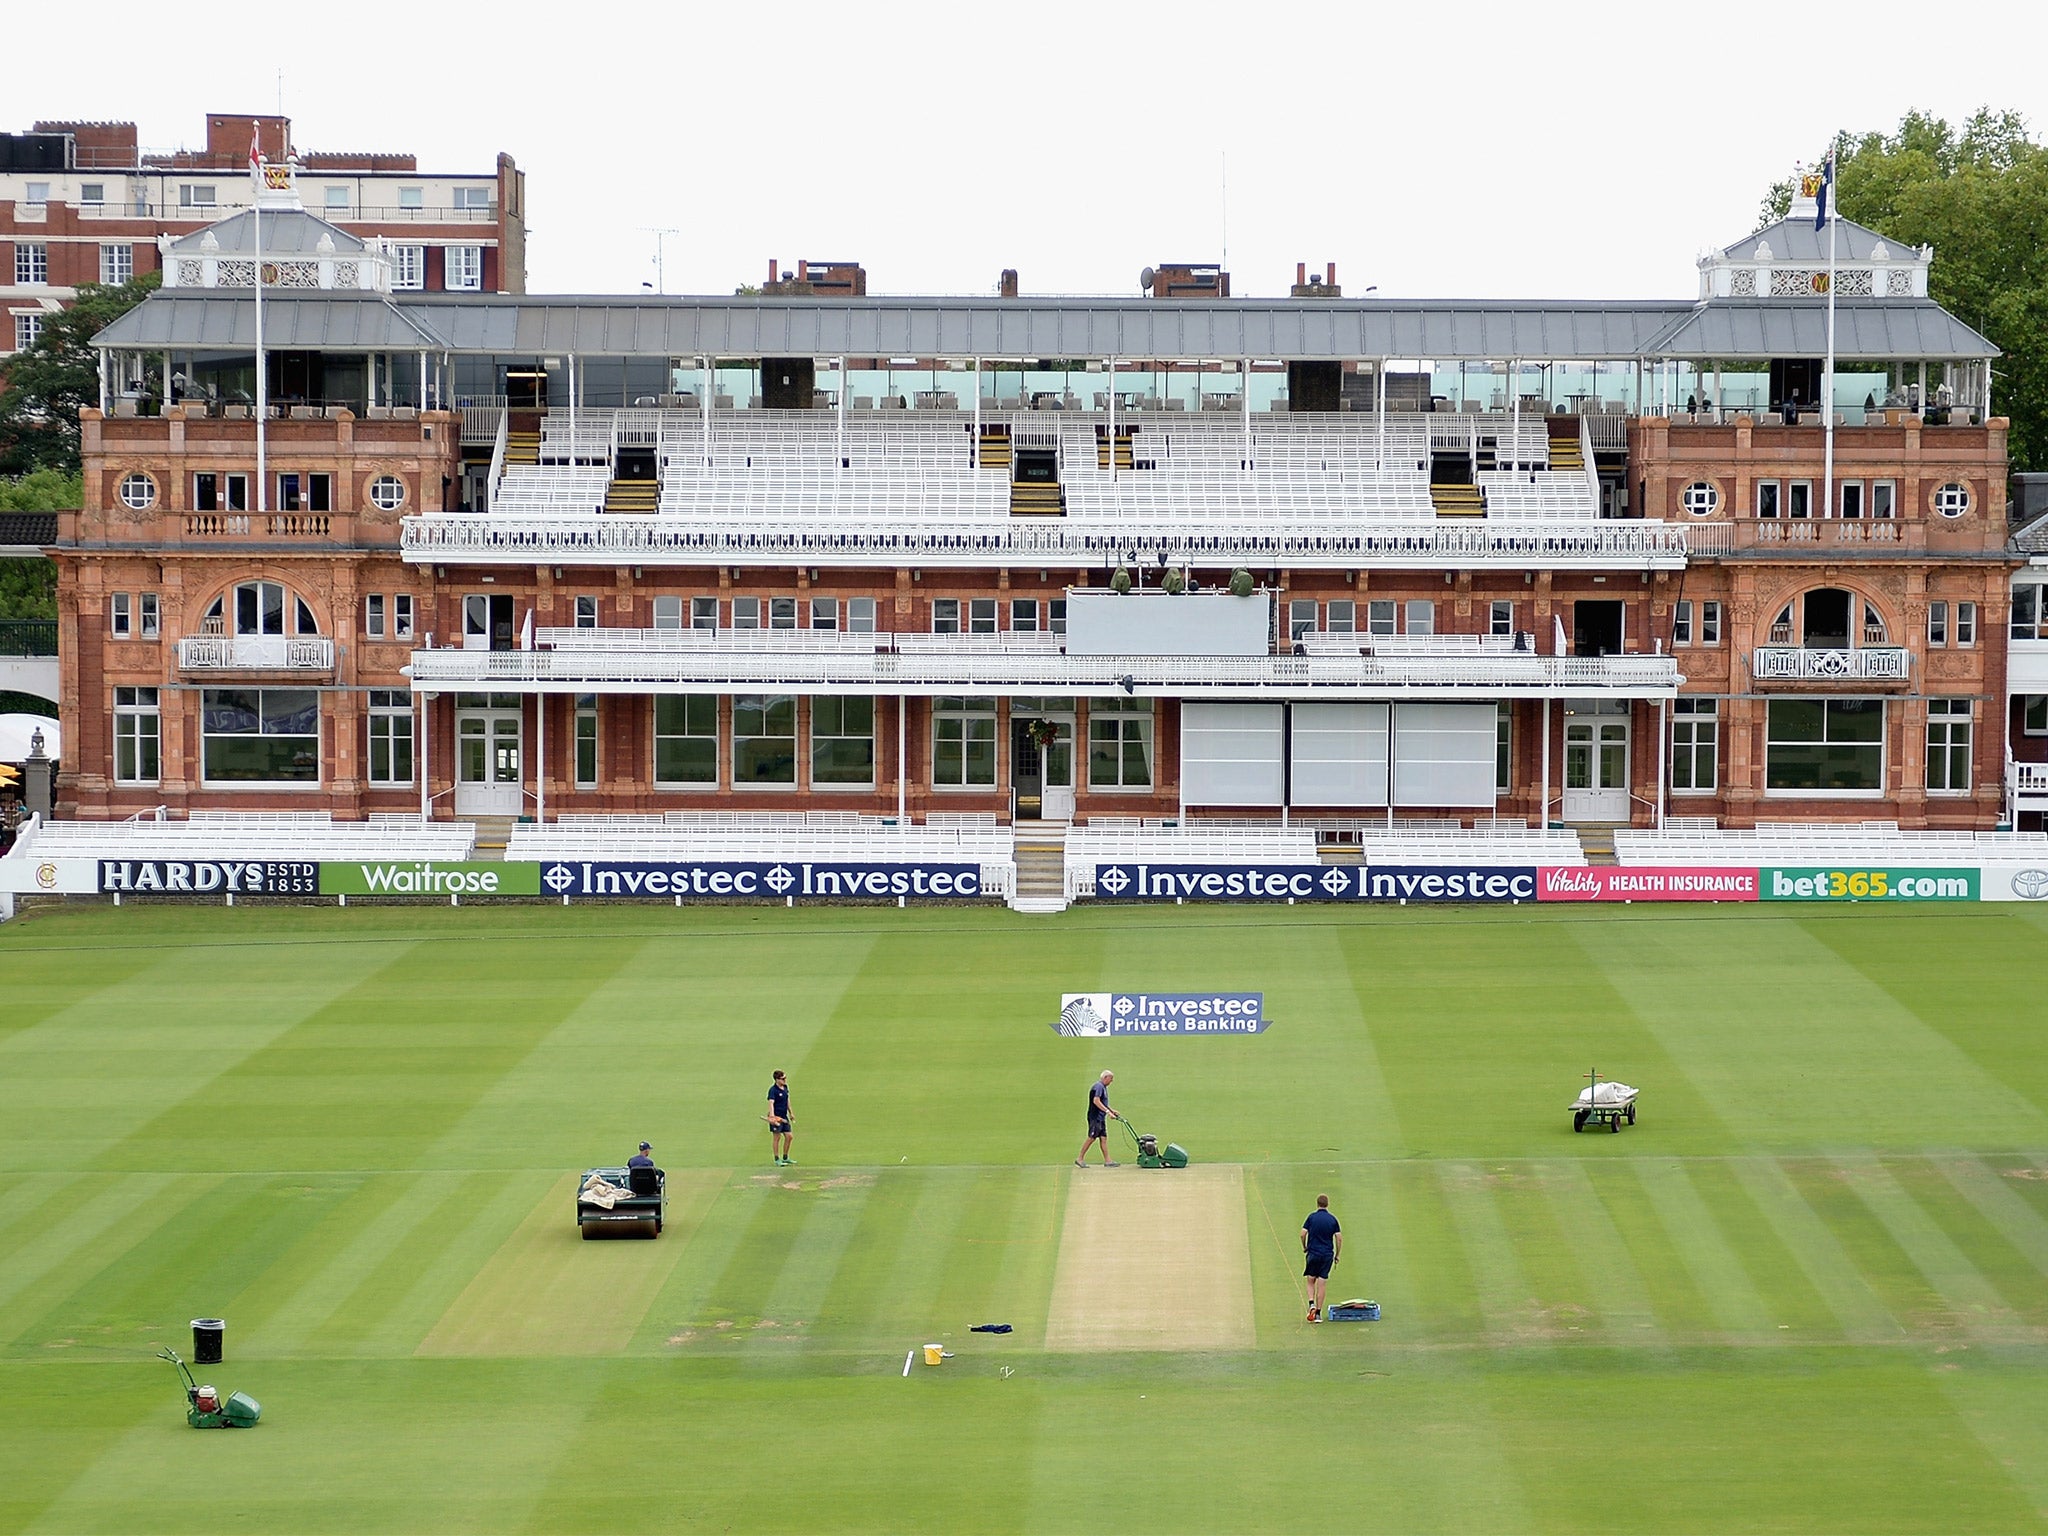 Final preparations are made to the Lord's pitch ahead of the second Ashes Test